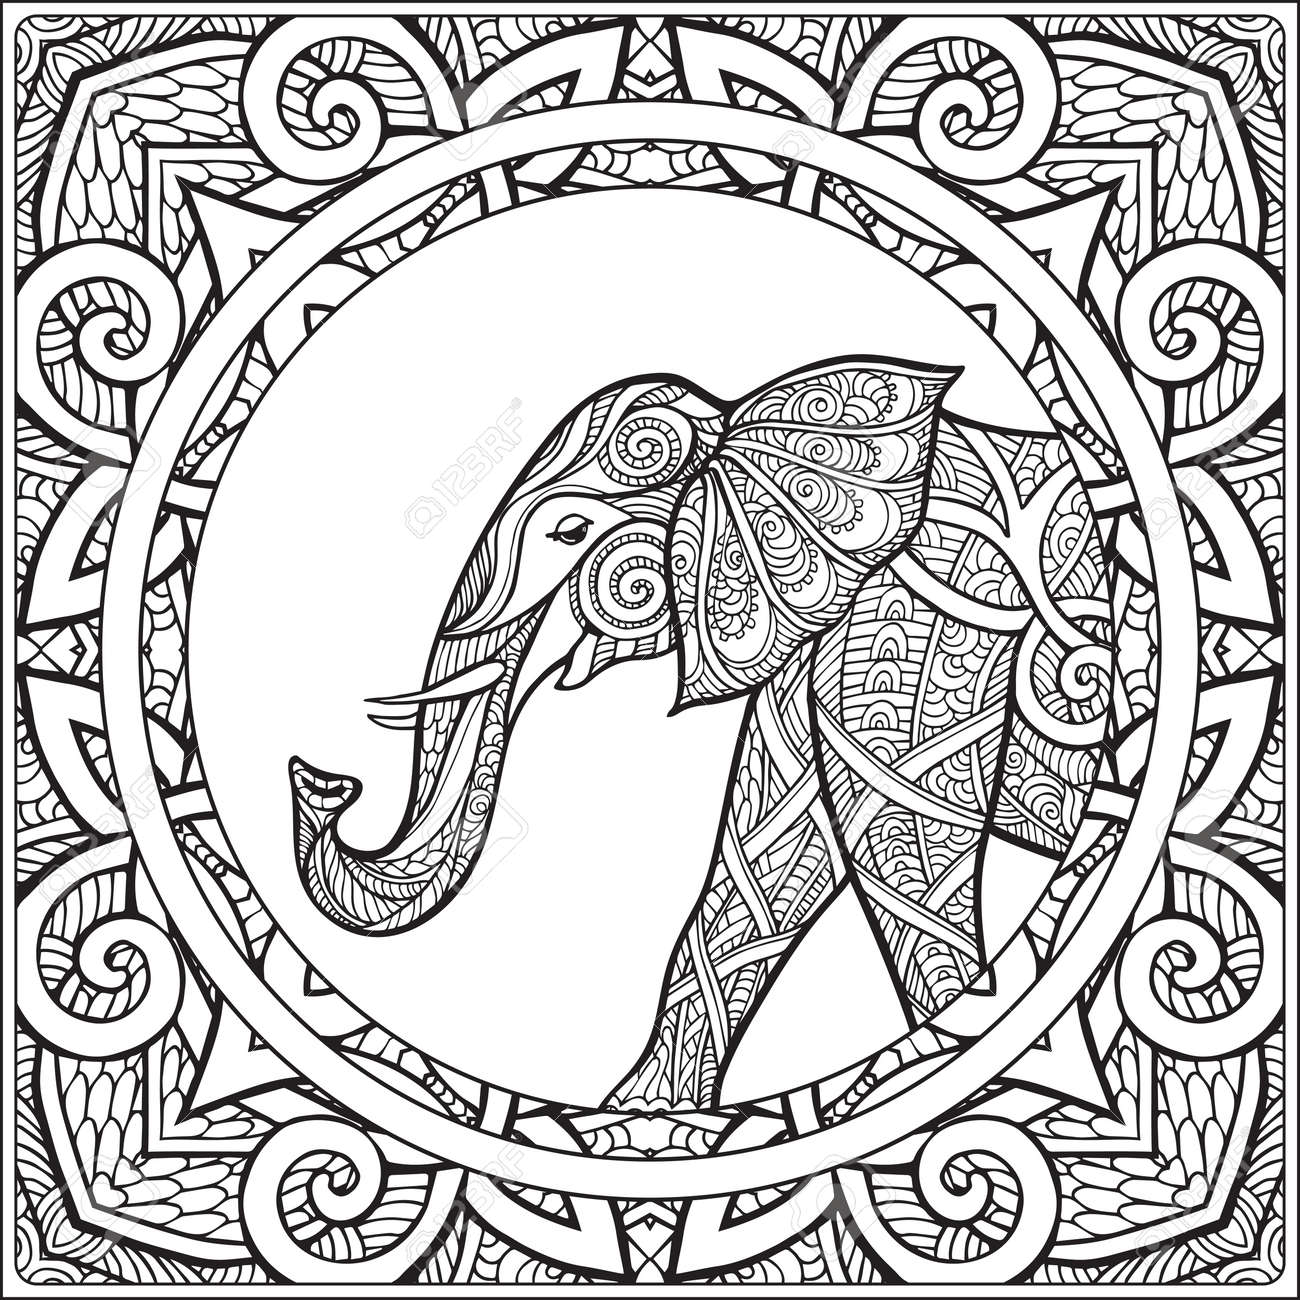 Coloring page with elephant in decorative mandala frame coloring book for adult and older children vector illustration outline drawing royalty free svg cliparts vectors and stock illustration image